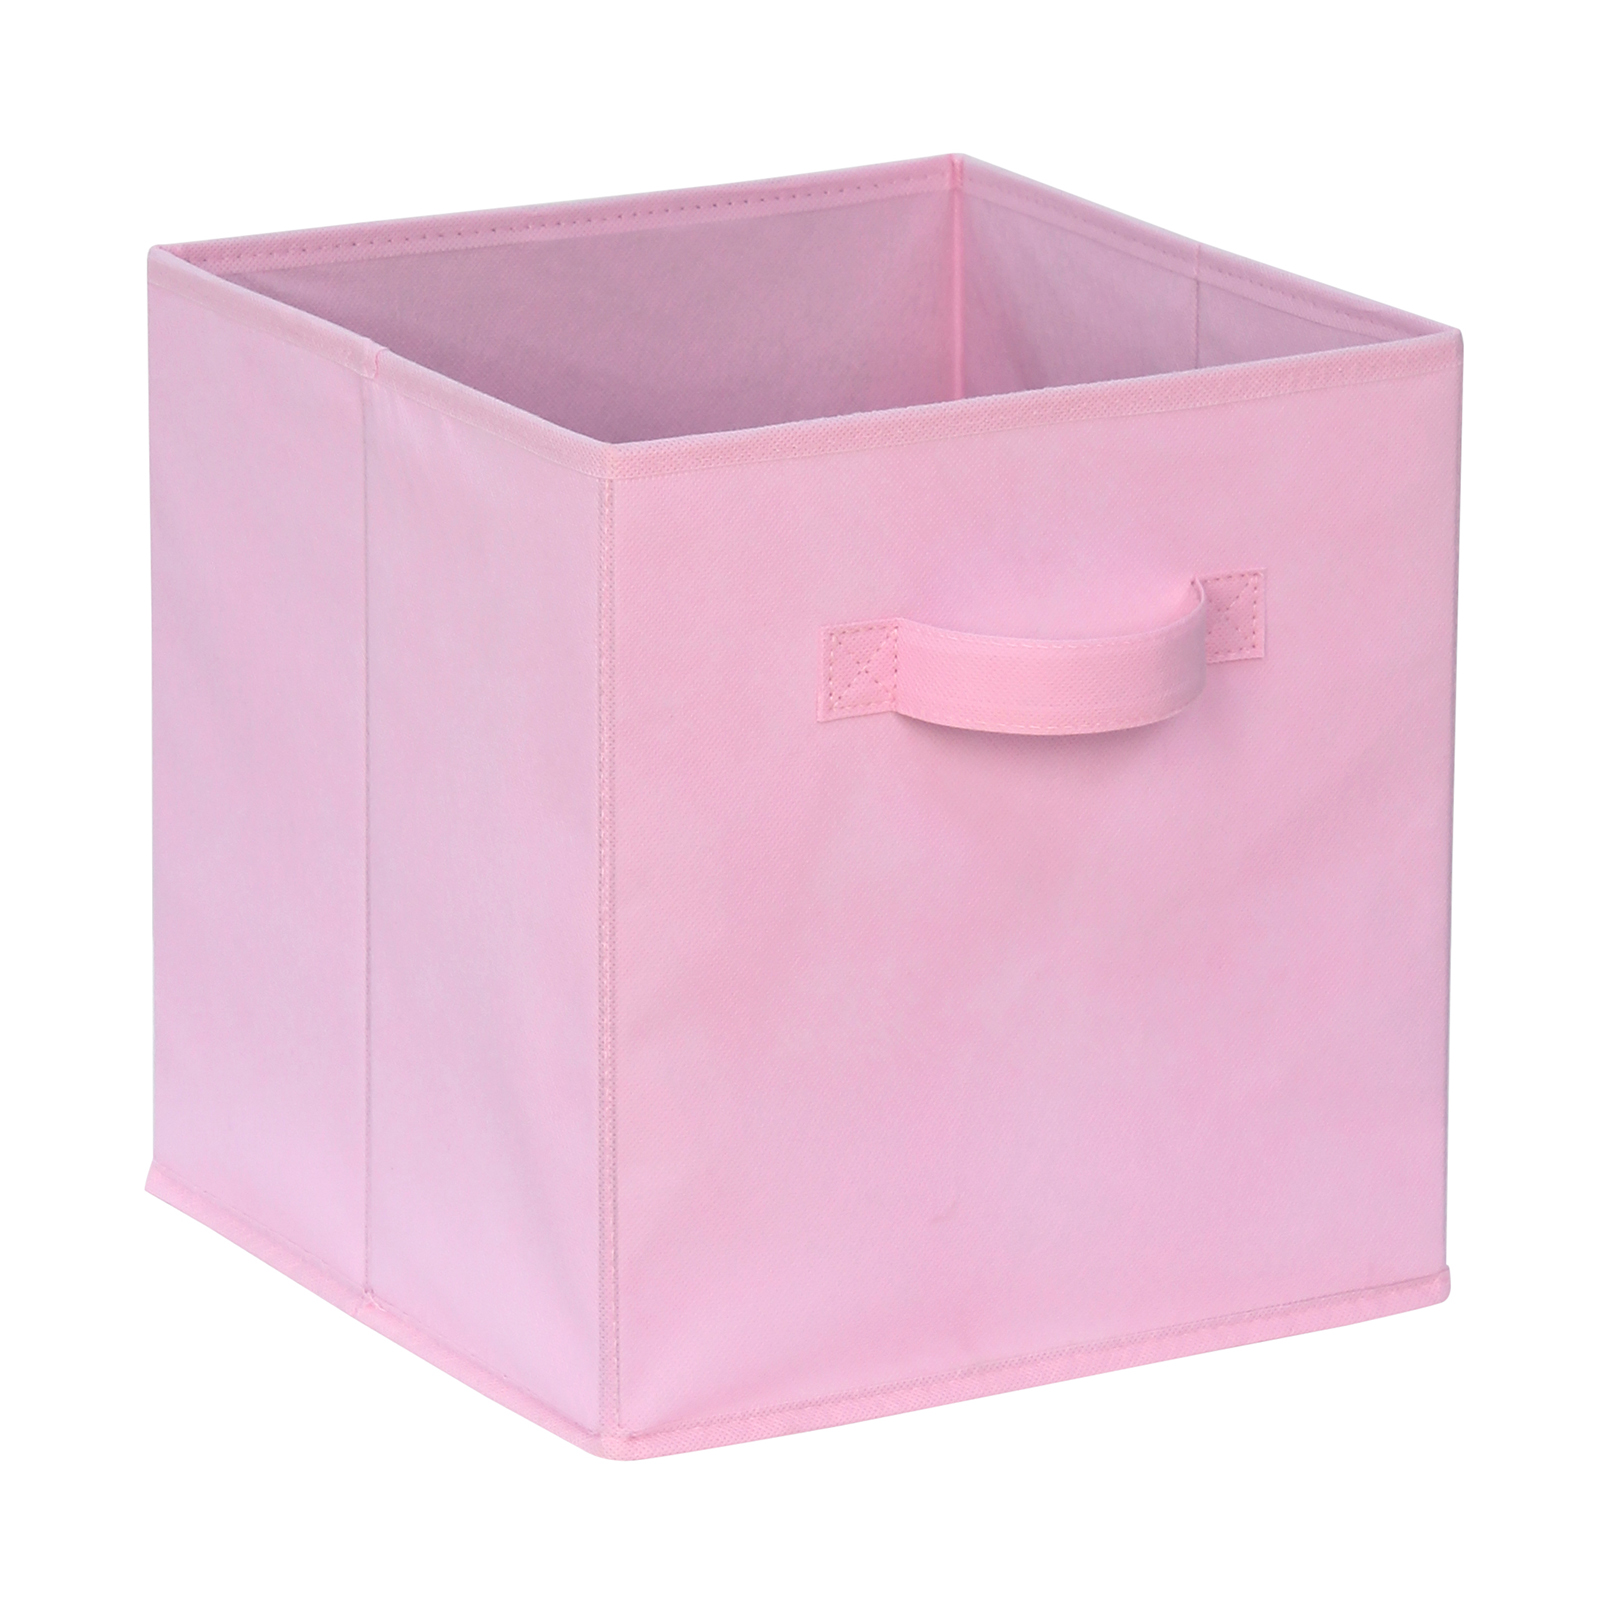 Clever Cube Fabric Insert Pale Pink